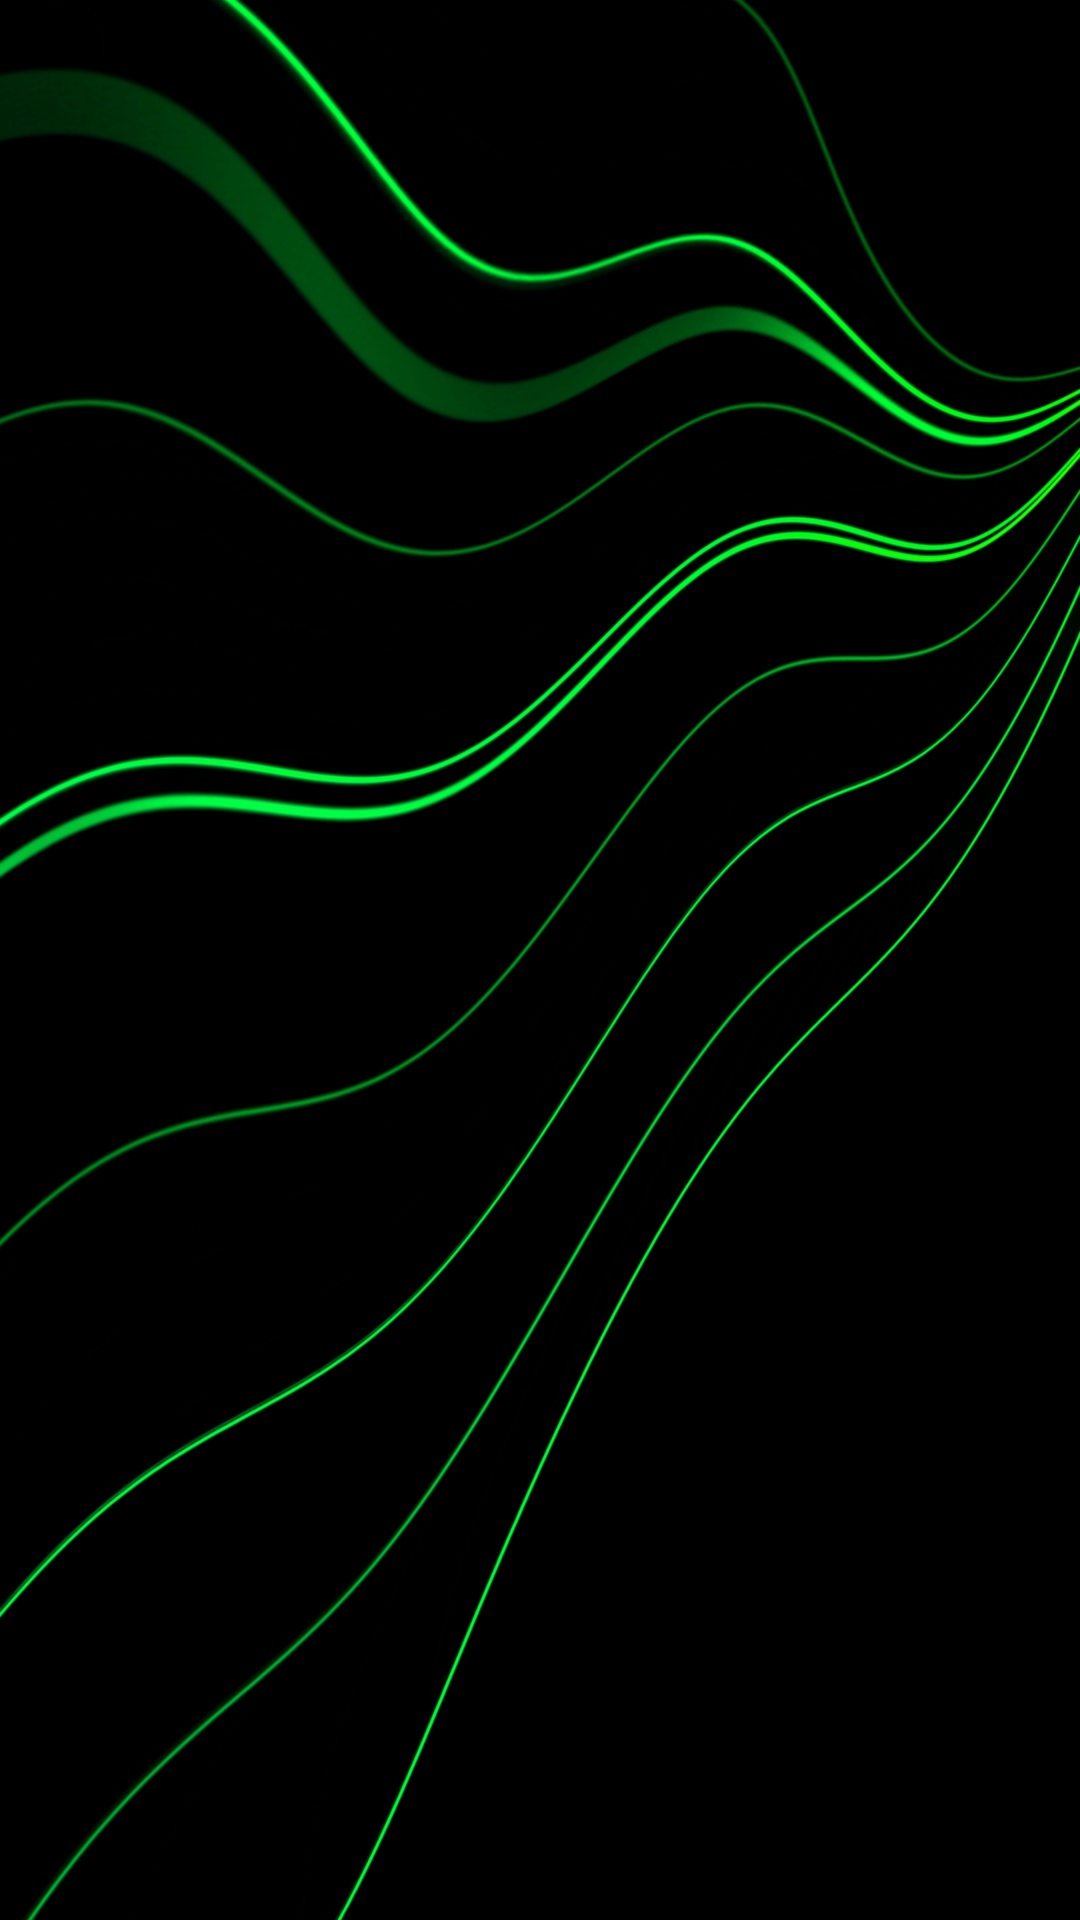 Green and White Line Illustration. Wallpaper in 1080x1920 Resolution